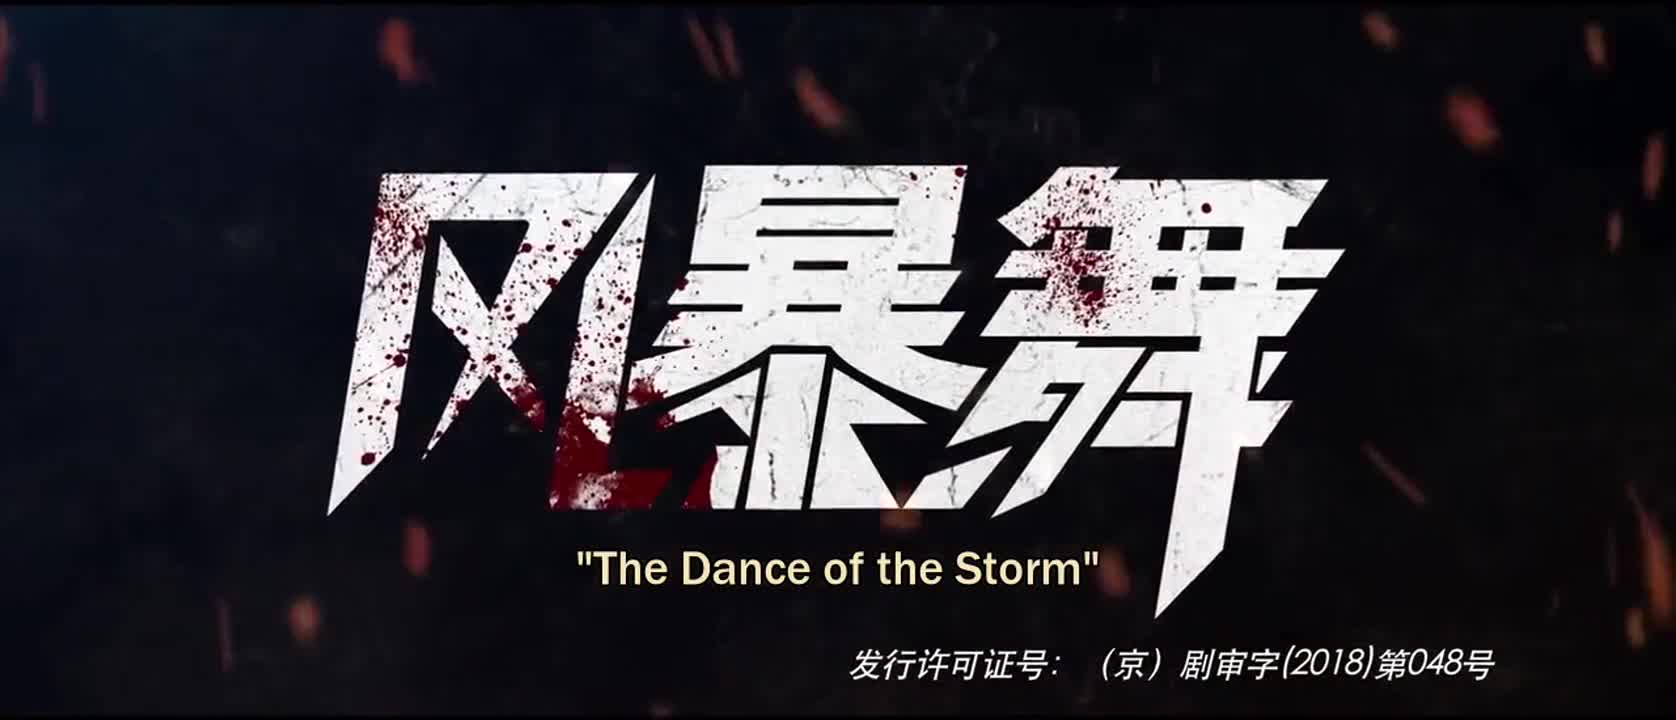 The Dance of the Storm (2021)